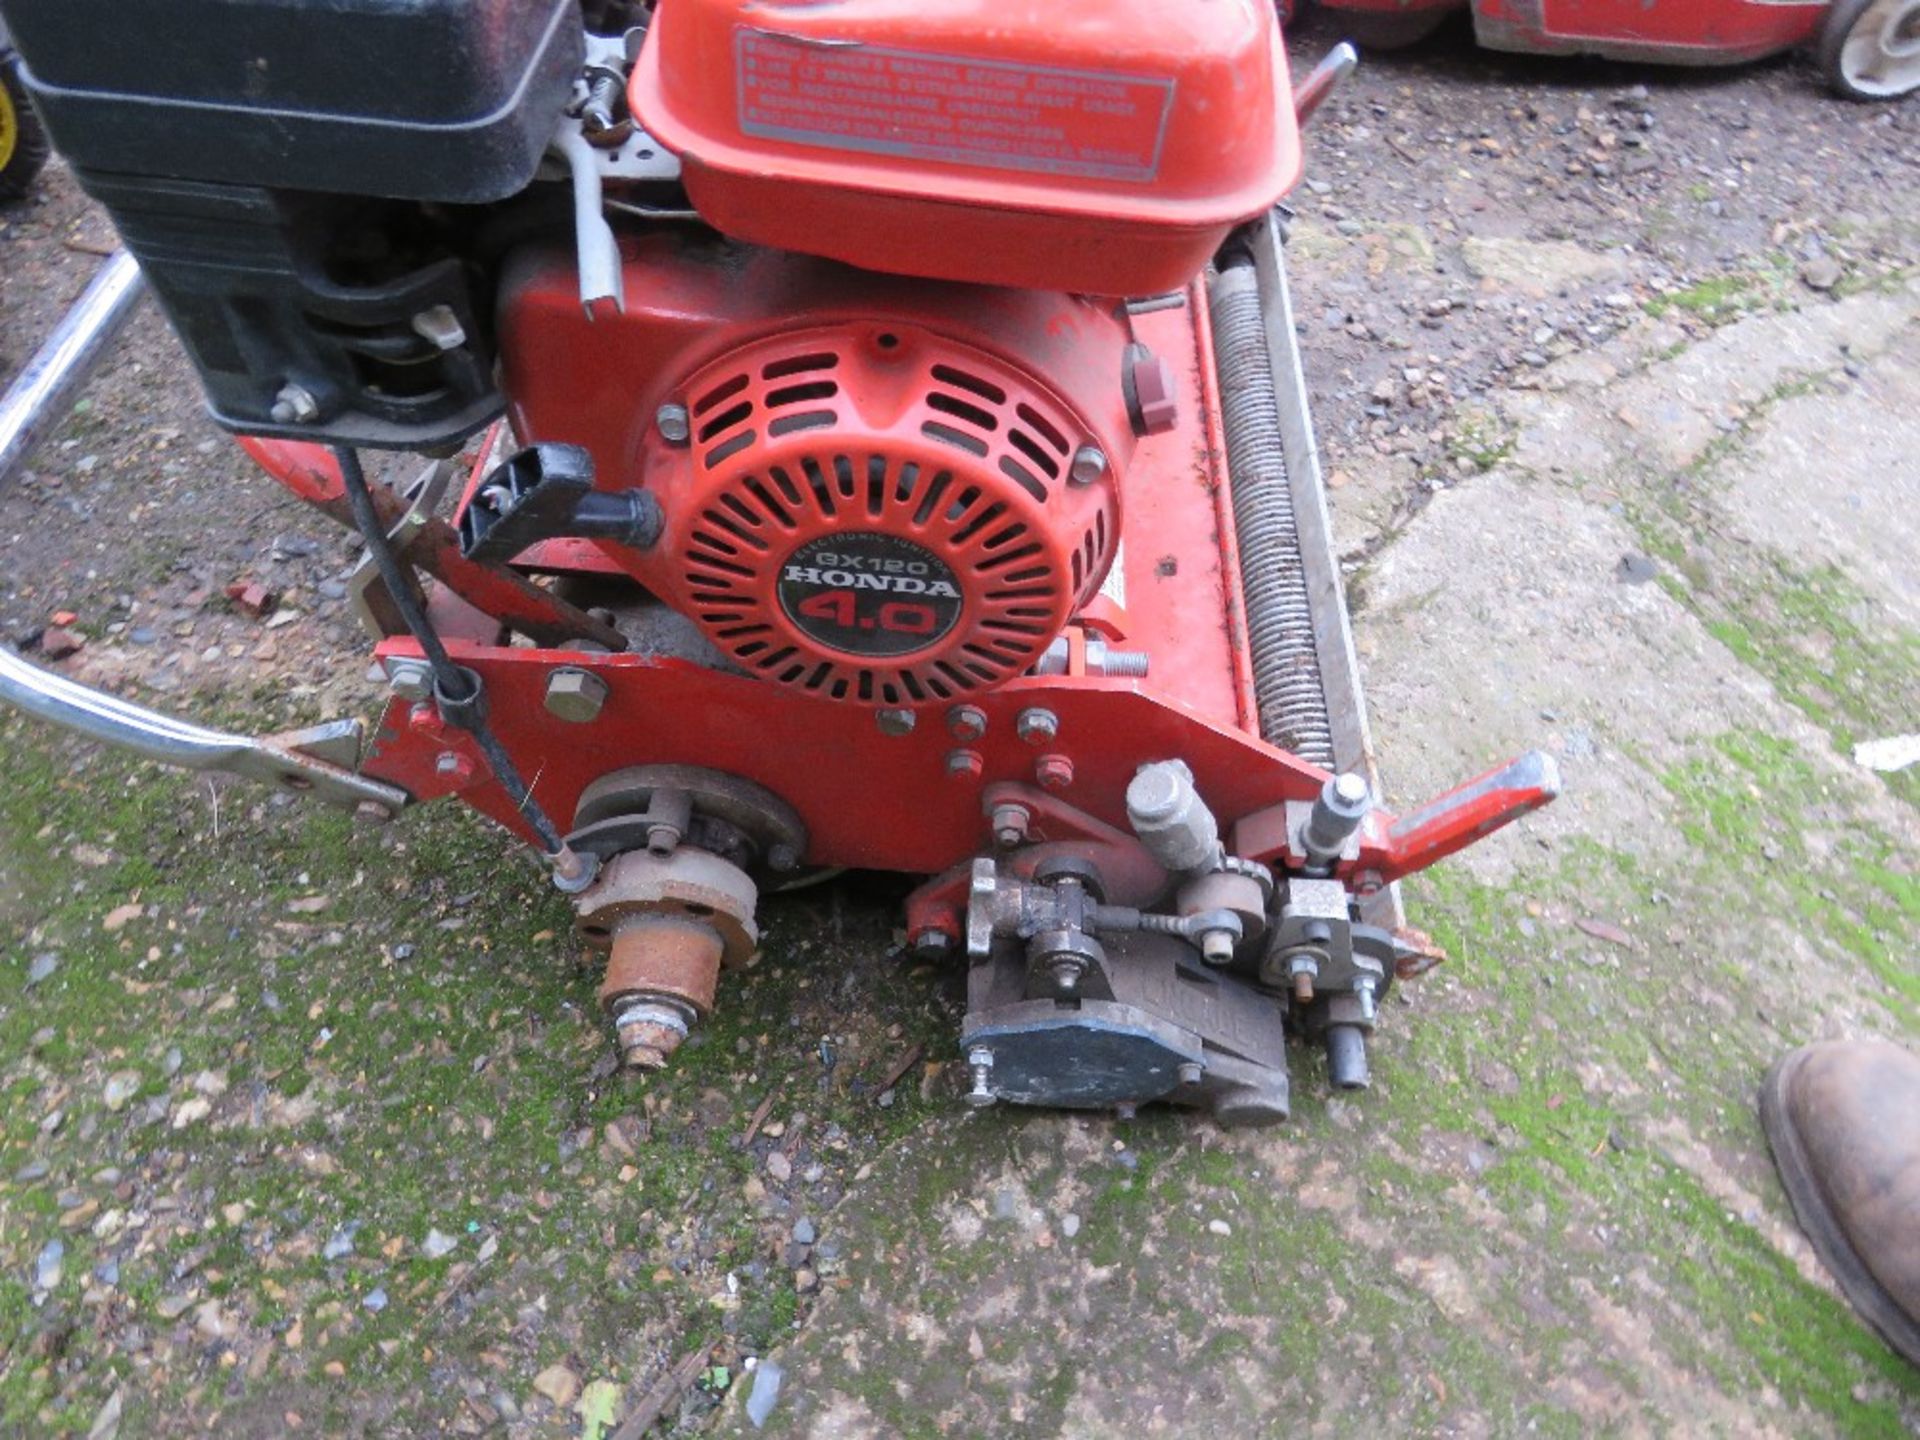 JACOBSEN PETROL ENGINED GREEN KING 522 CYLINDER LAWN MOWERN HONDA ENGINE, NO BOX. THIS LOT IS SOL - Image 5 of 6